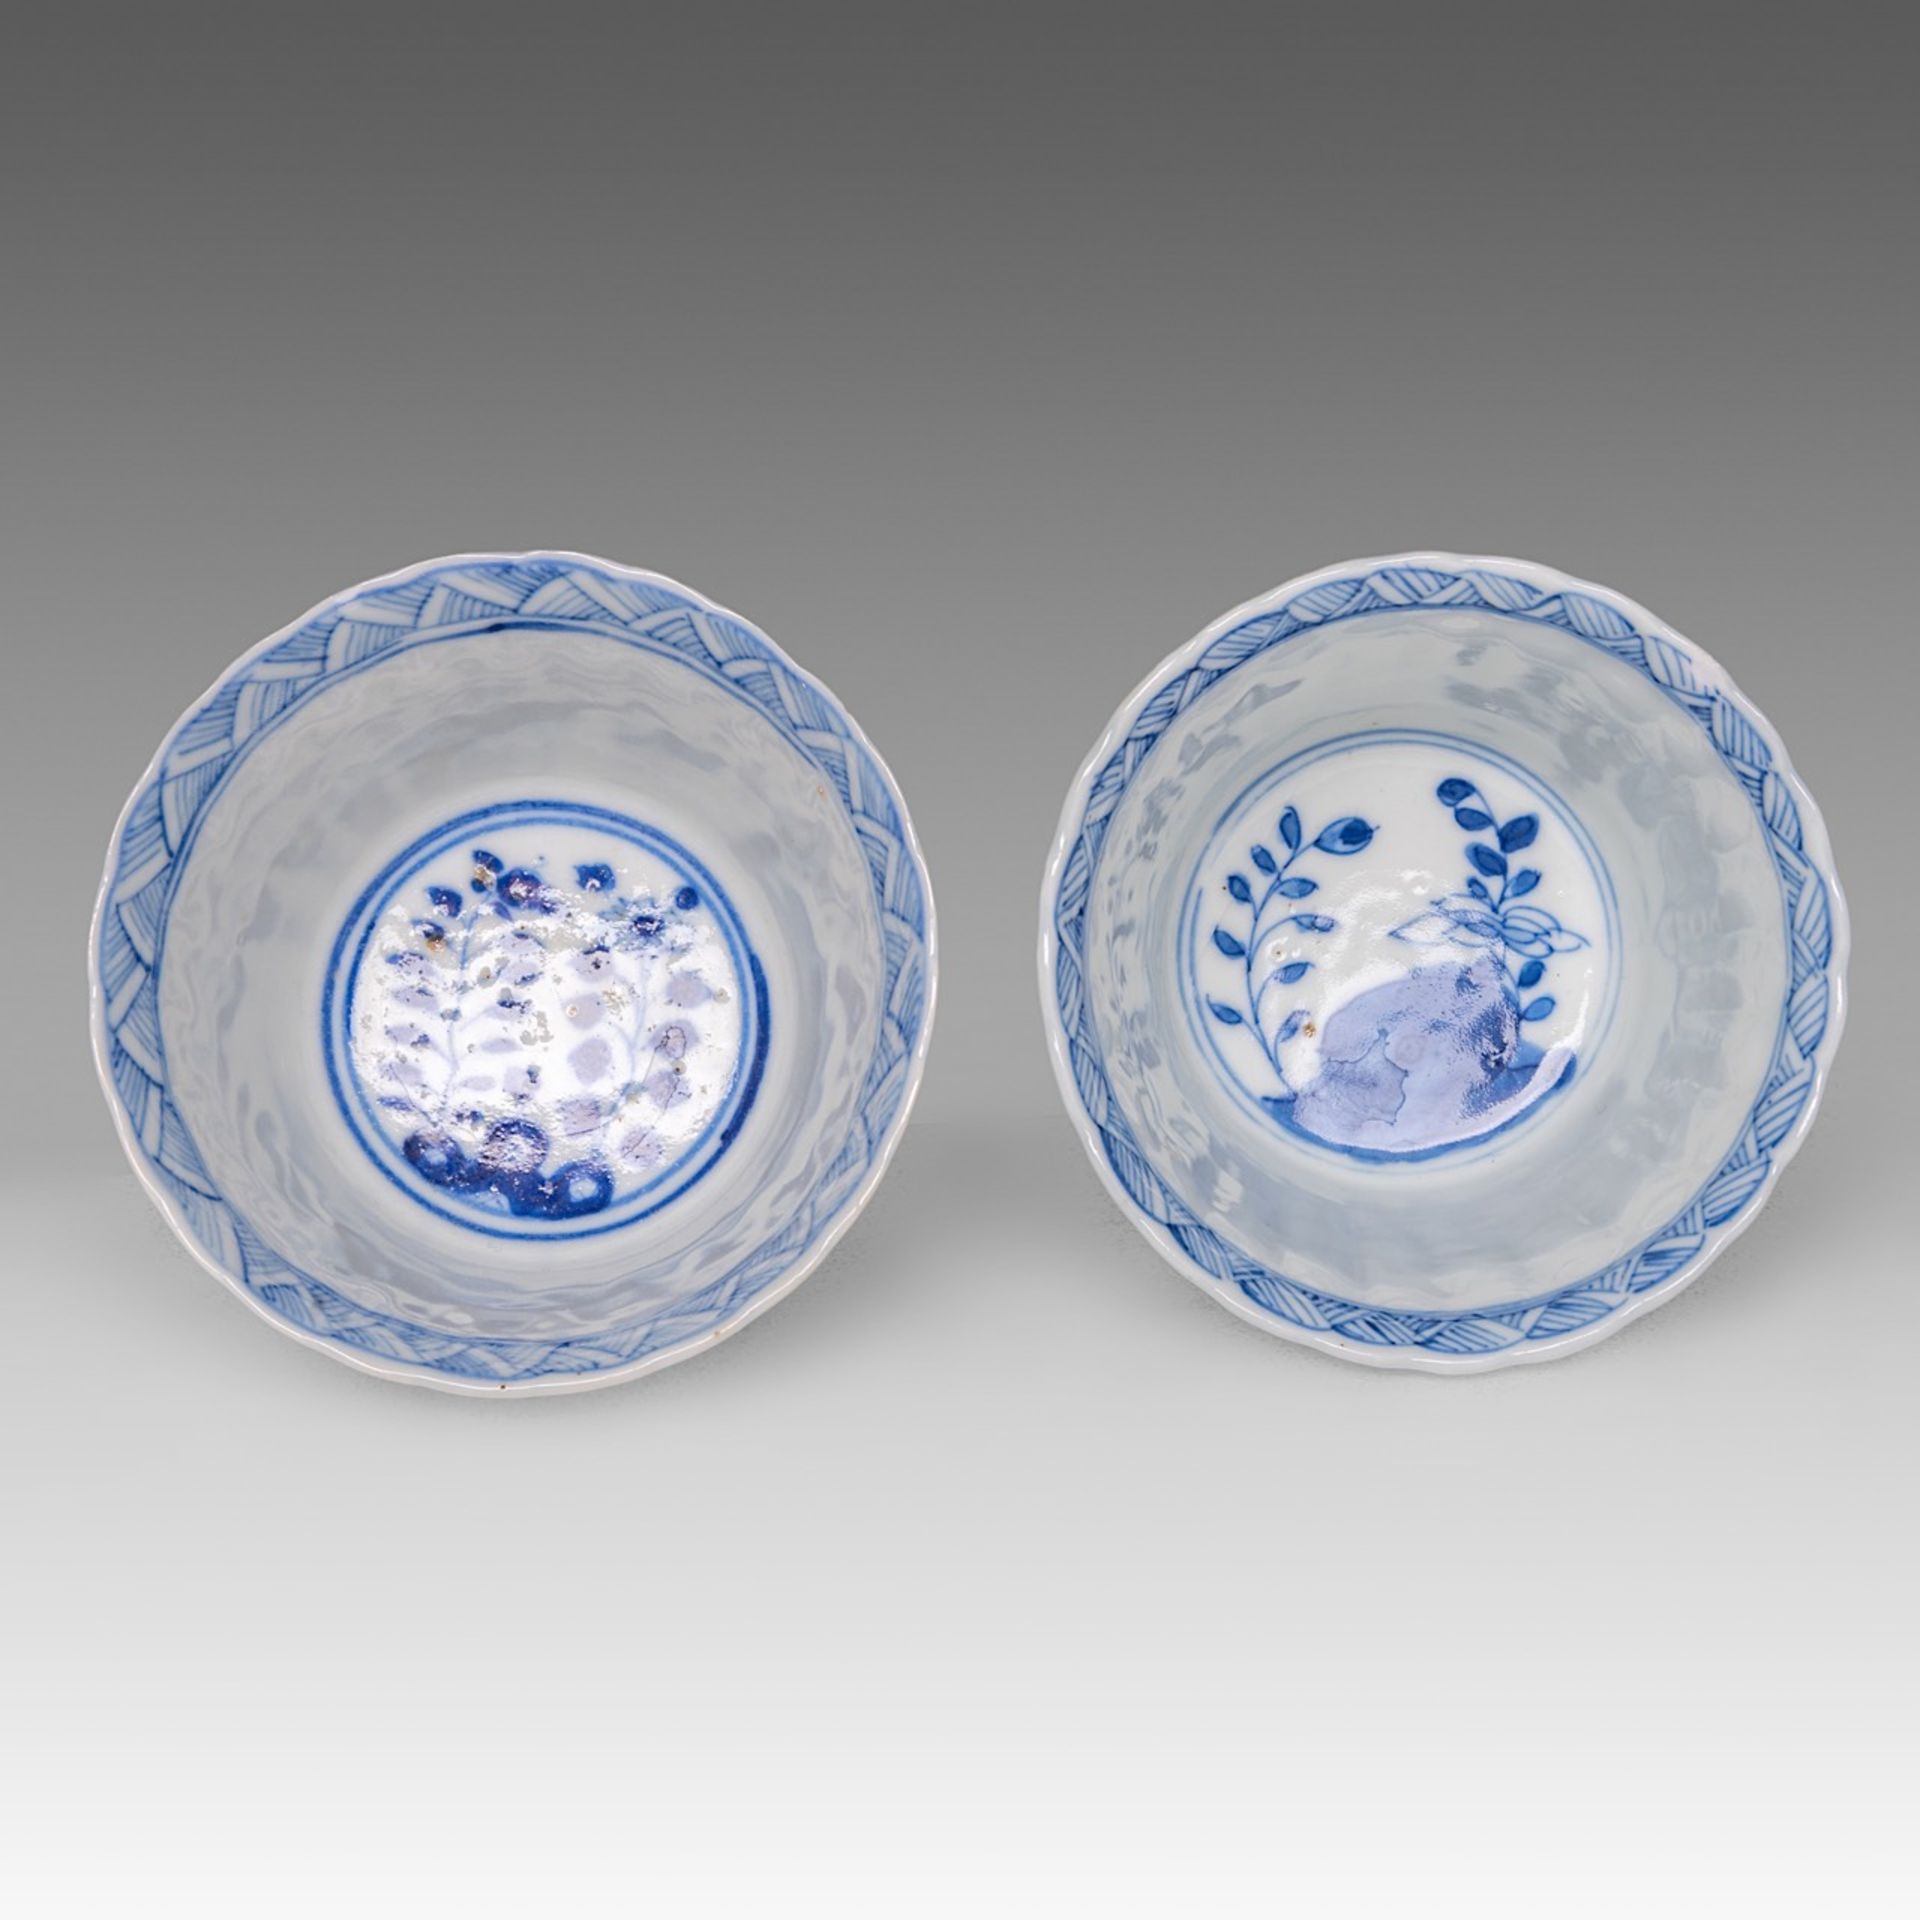 Six matching sets of Chinese blue and white floral decorated tea cups and saucers, Kangxi period, di - Image 10 of 17